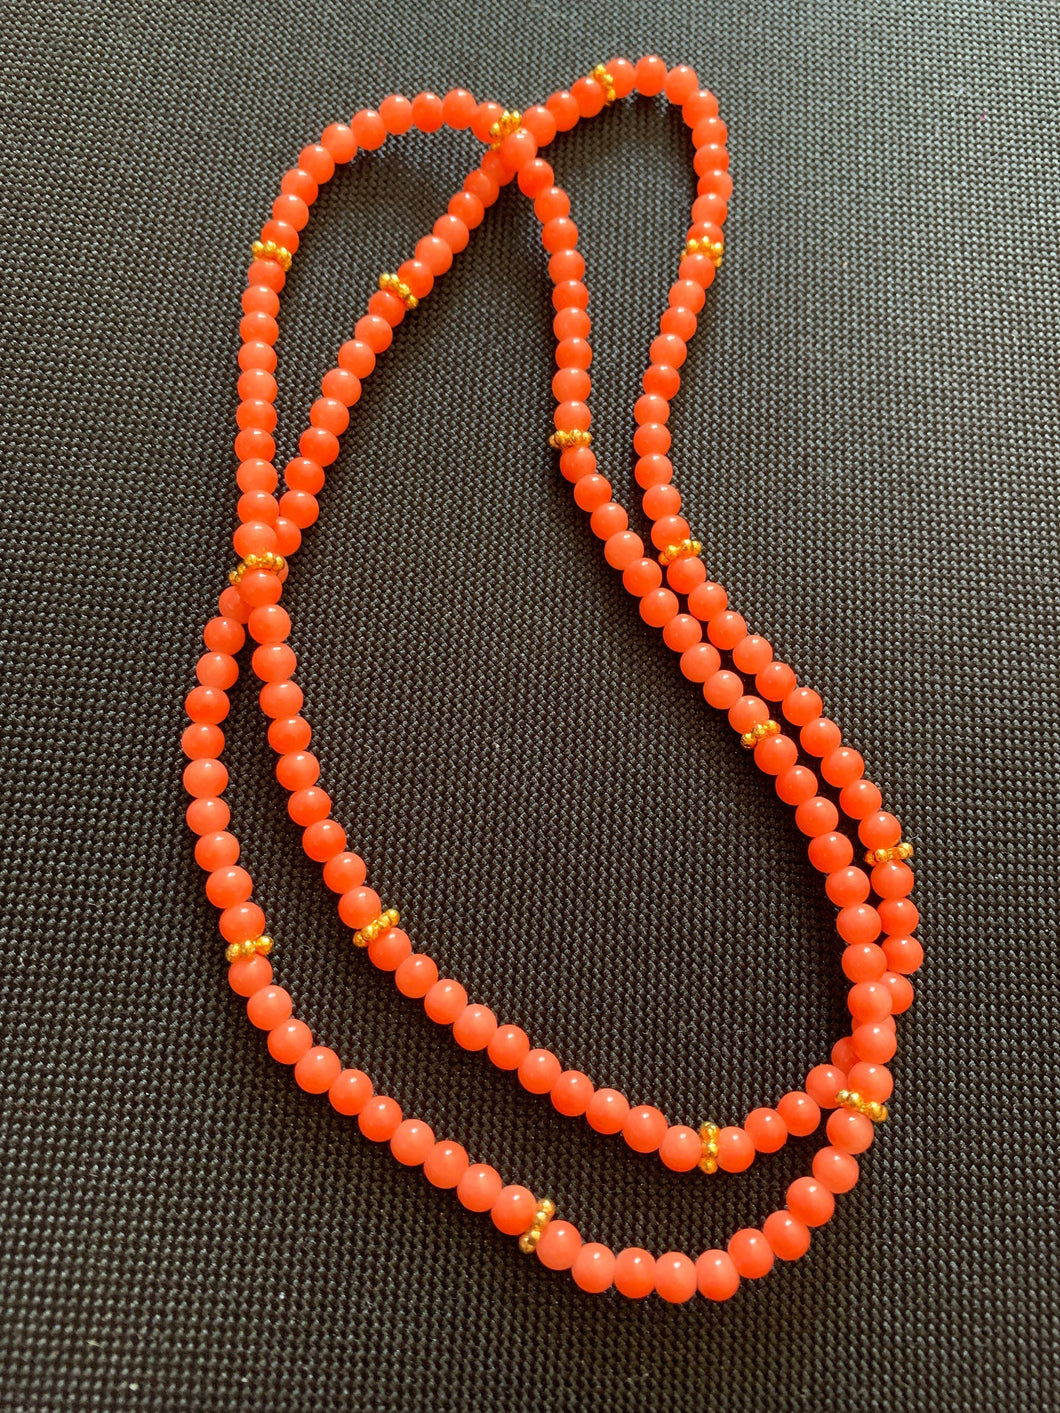 Law Of Attraction Over The Head Beaded Orange and Gold for Manifesting Success and Joy Faux Pearl Fashion Statement Intention Jewellery